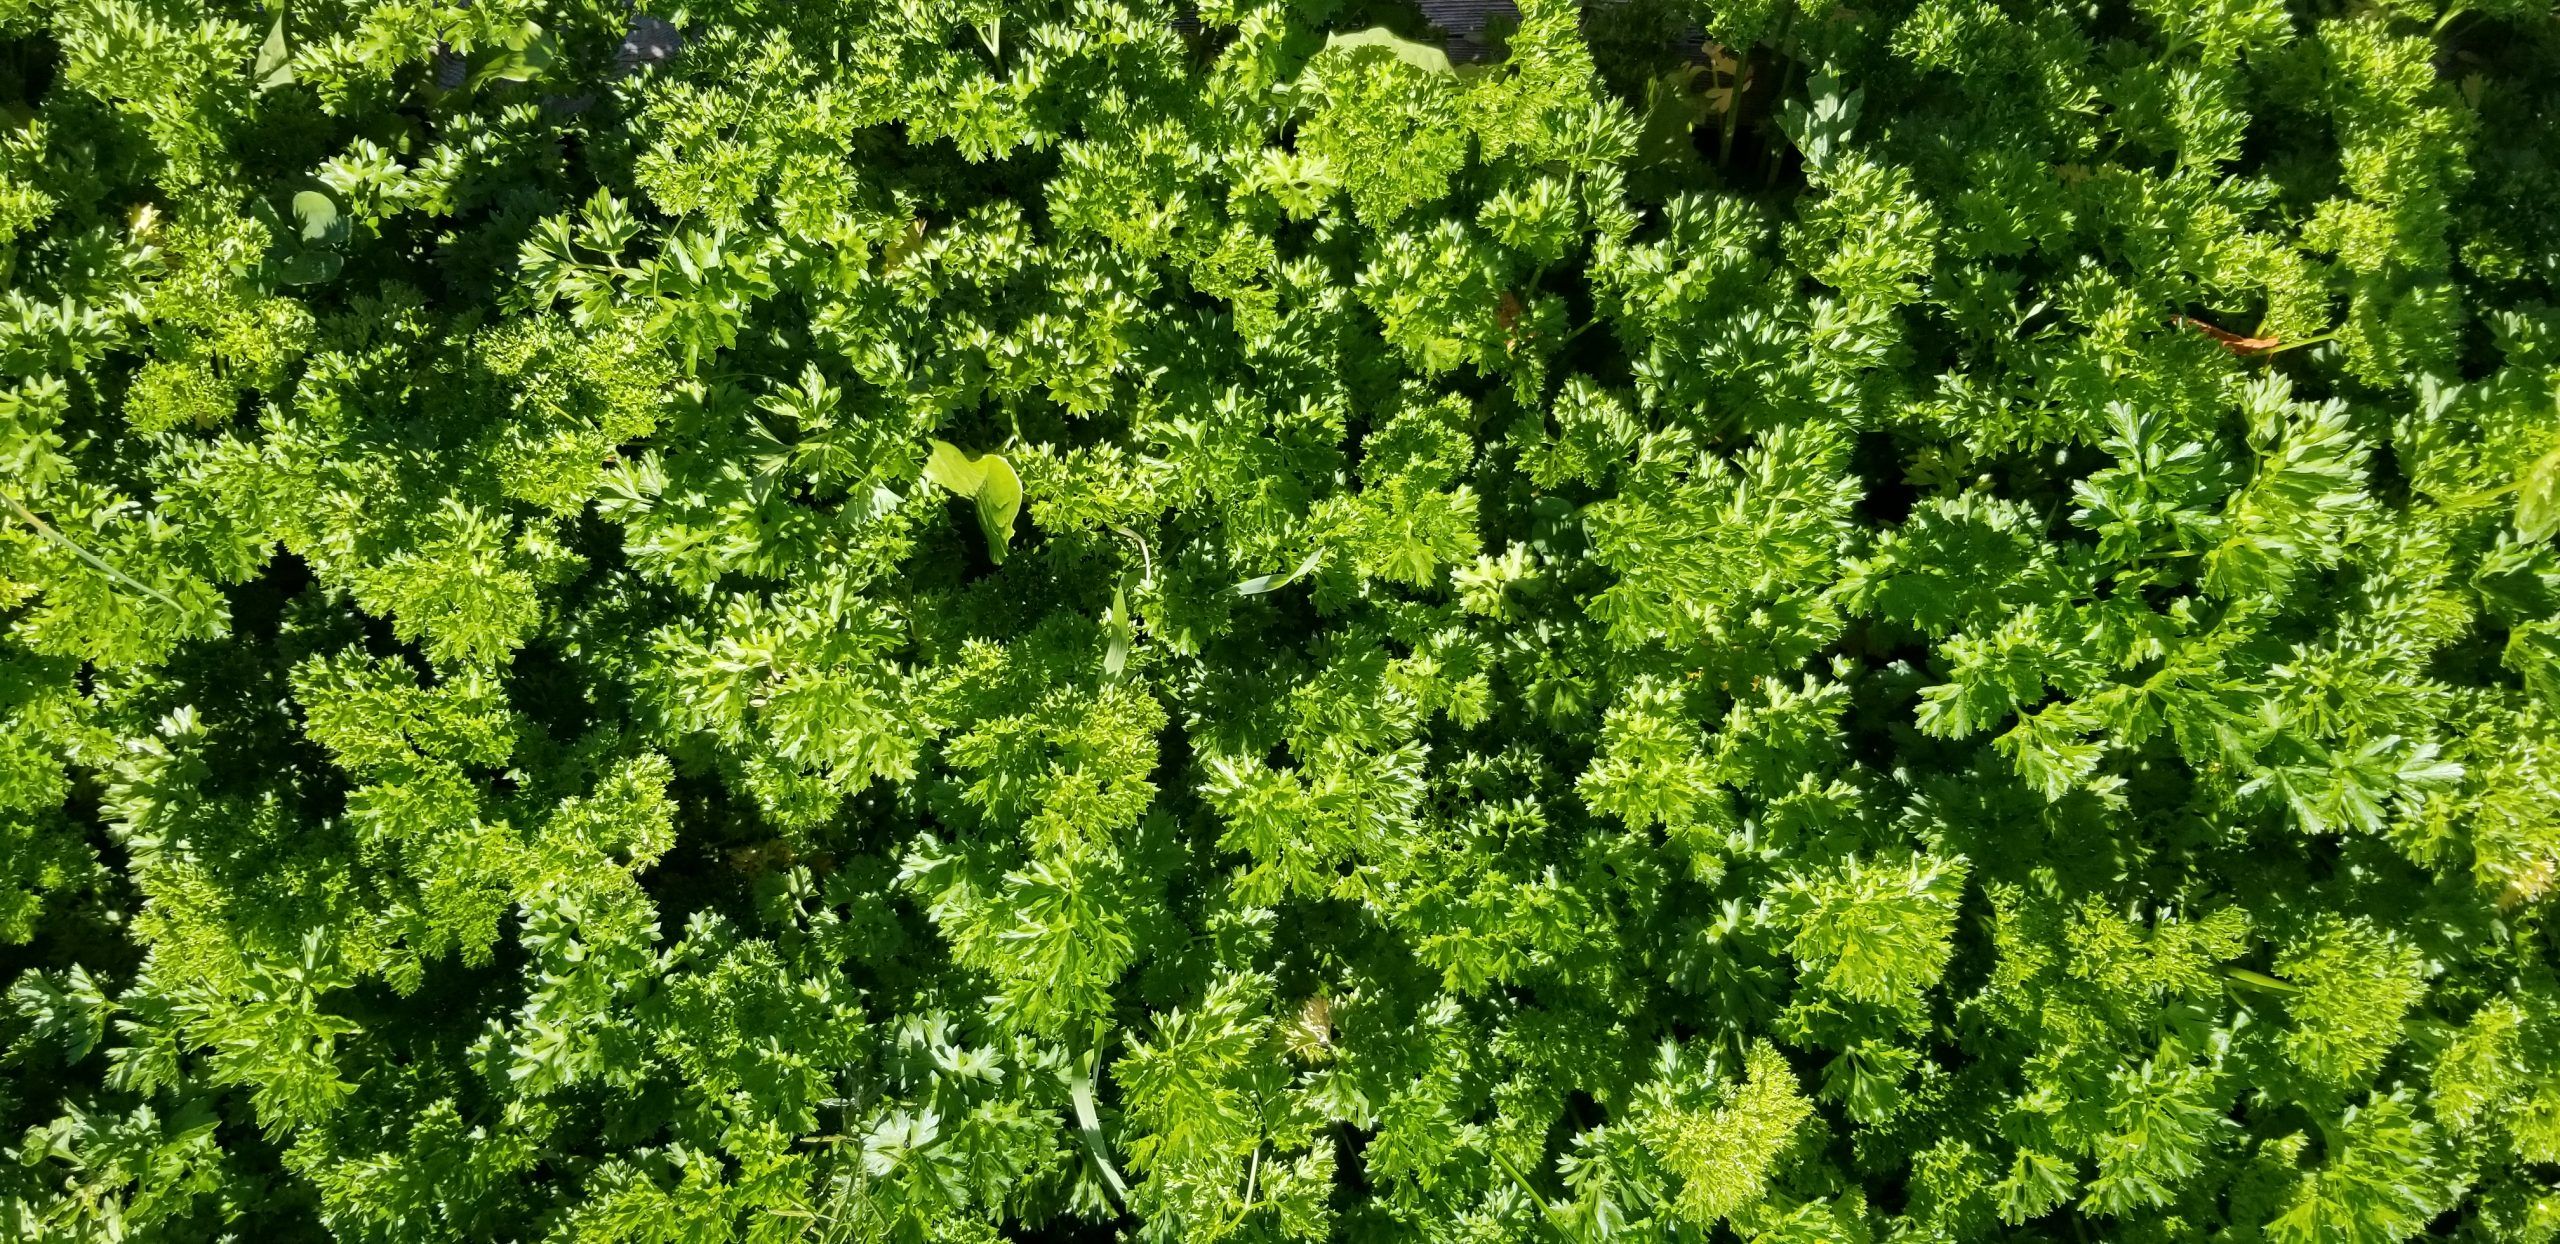 Herb Parsley Double Curled #4023